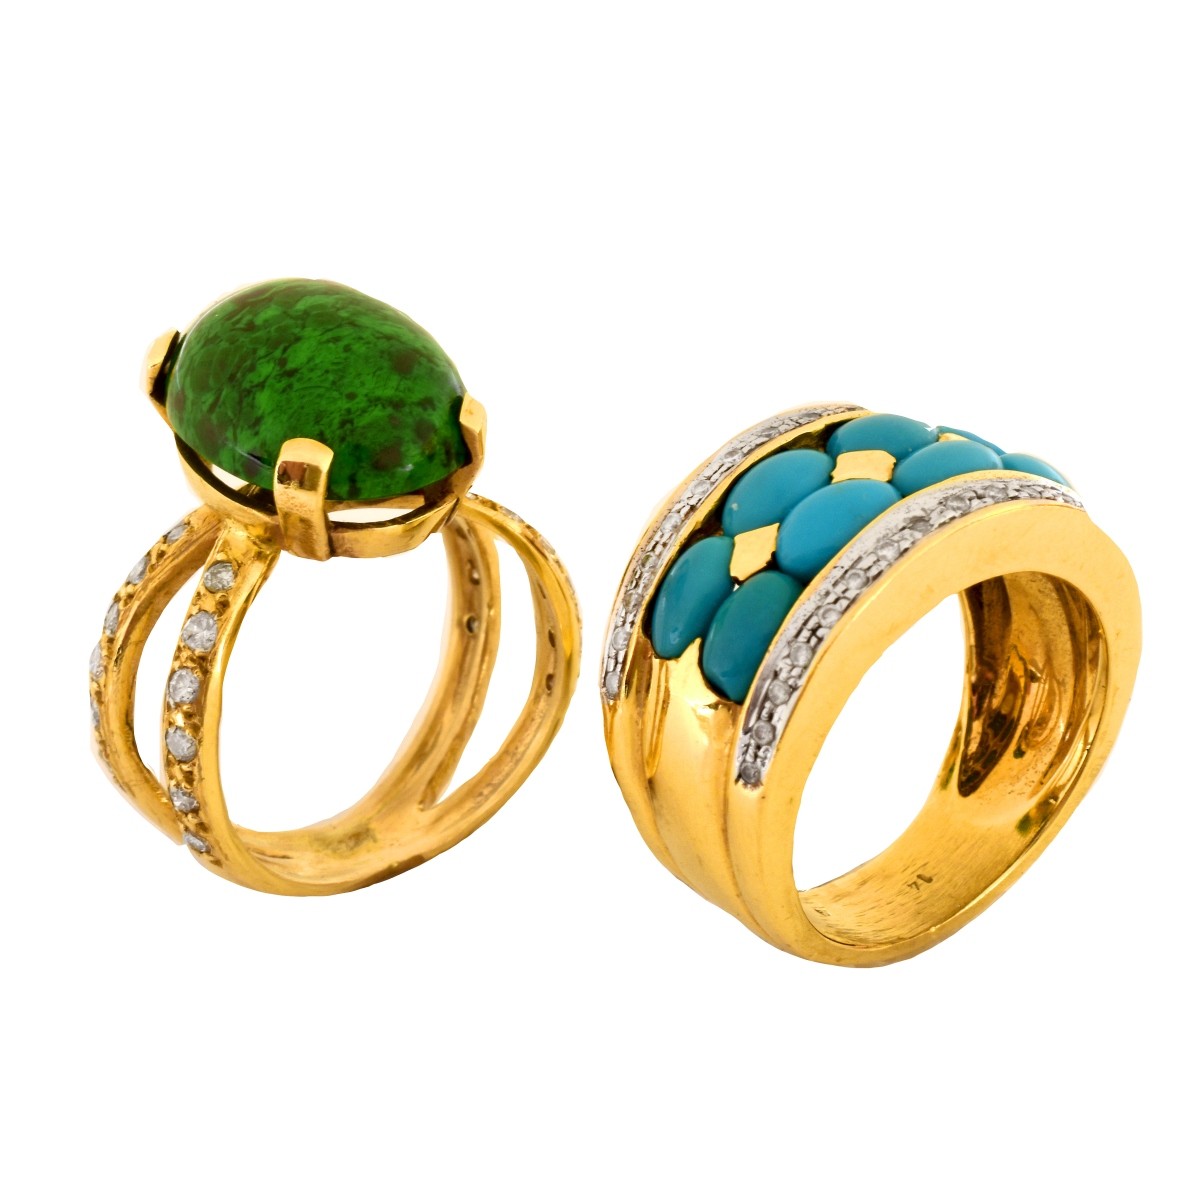 Two (2) Vintage 14K Gold Rings